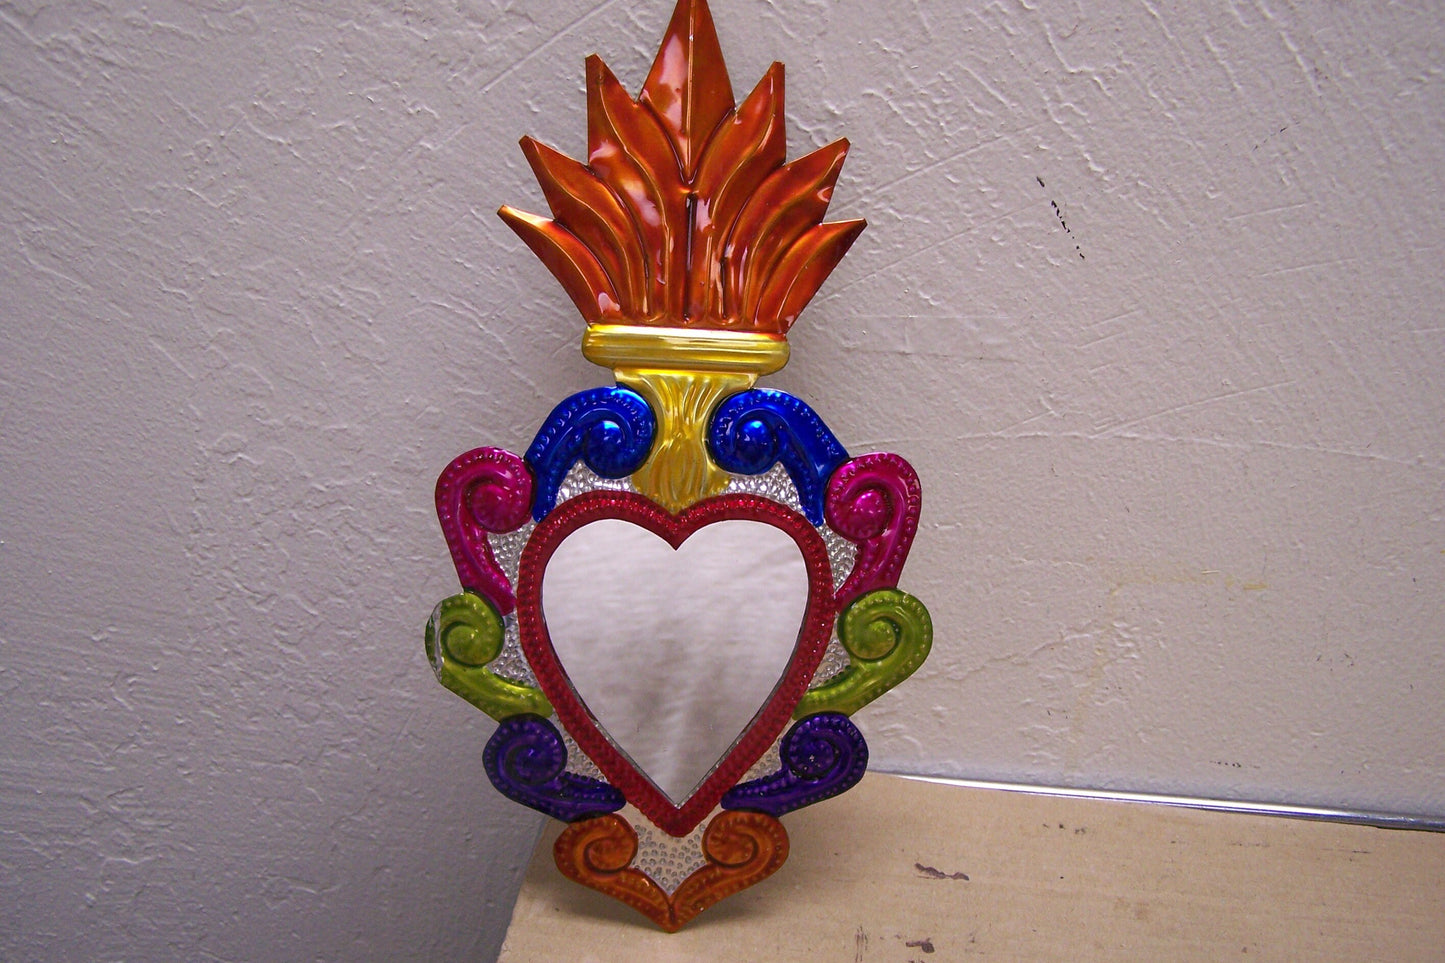 Large Tin Painted Sacred Heart Mirror - Tall Orange Flames - Mexico